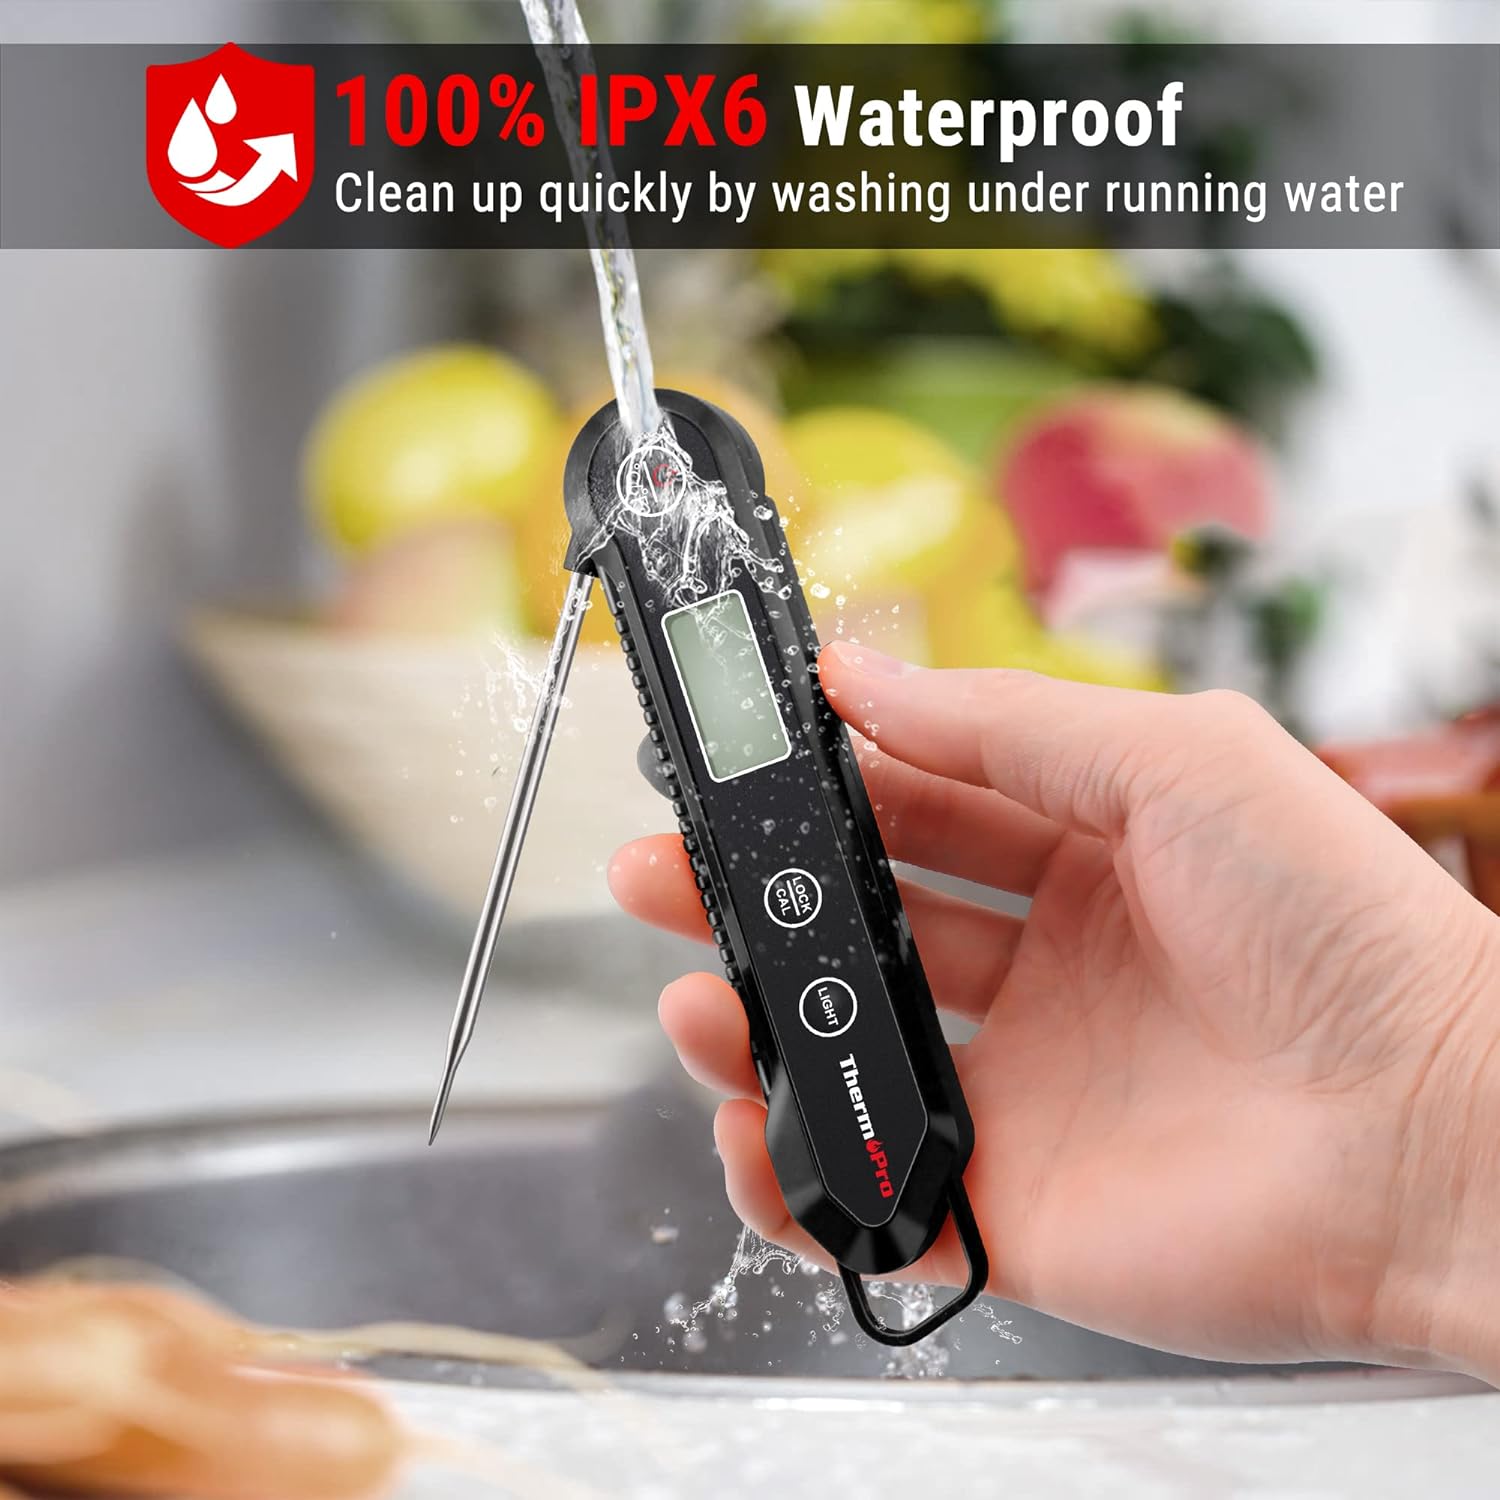 ThermoPro Digital Instant Read Meat Thermometer for Grilling Waterproof Kitchen Food LCD Thermometer with Calibration  Backlight Smoker Oil Fry Candy Thermometer